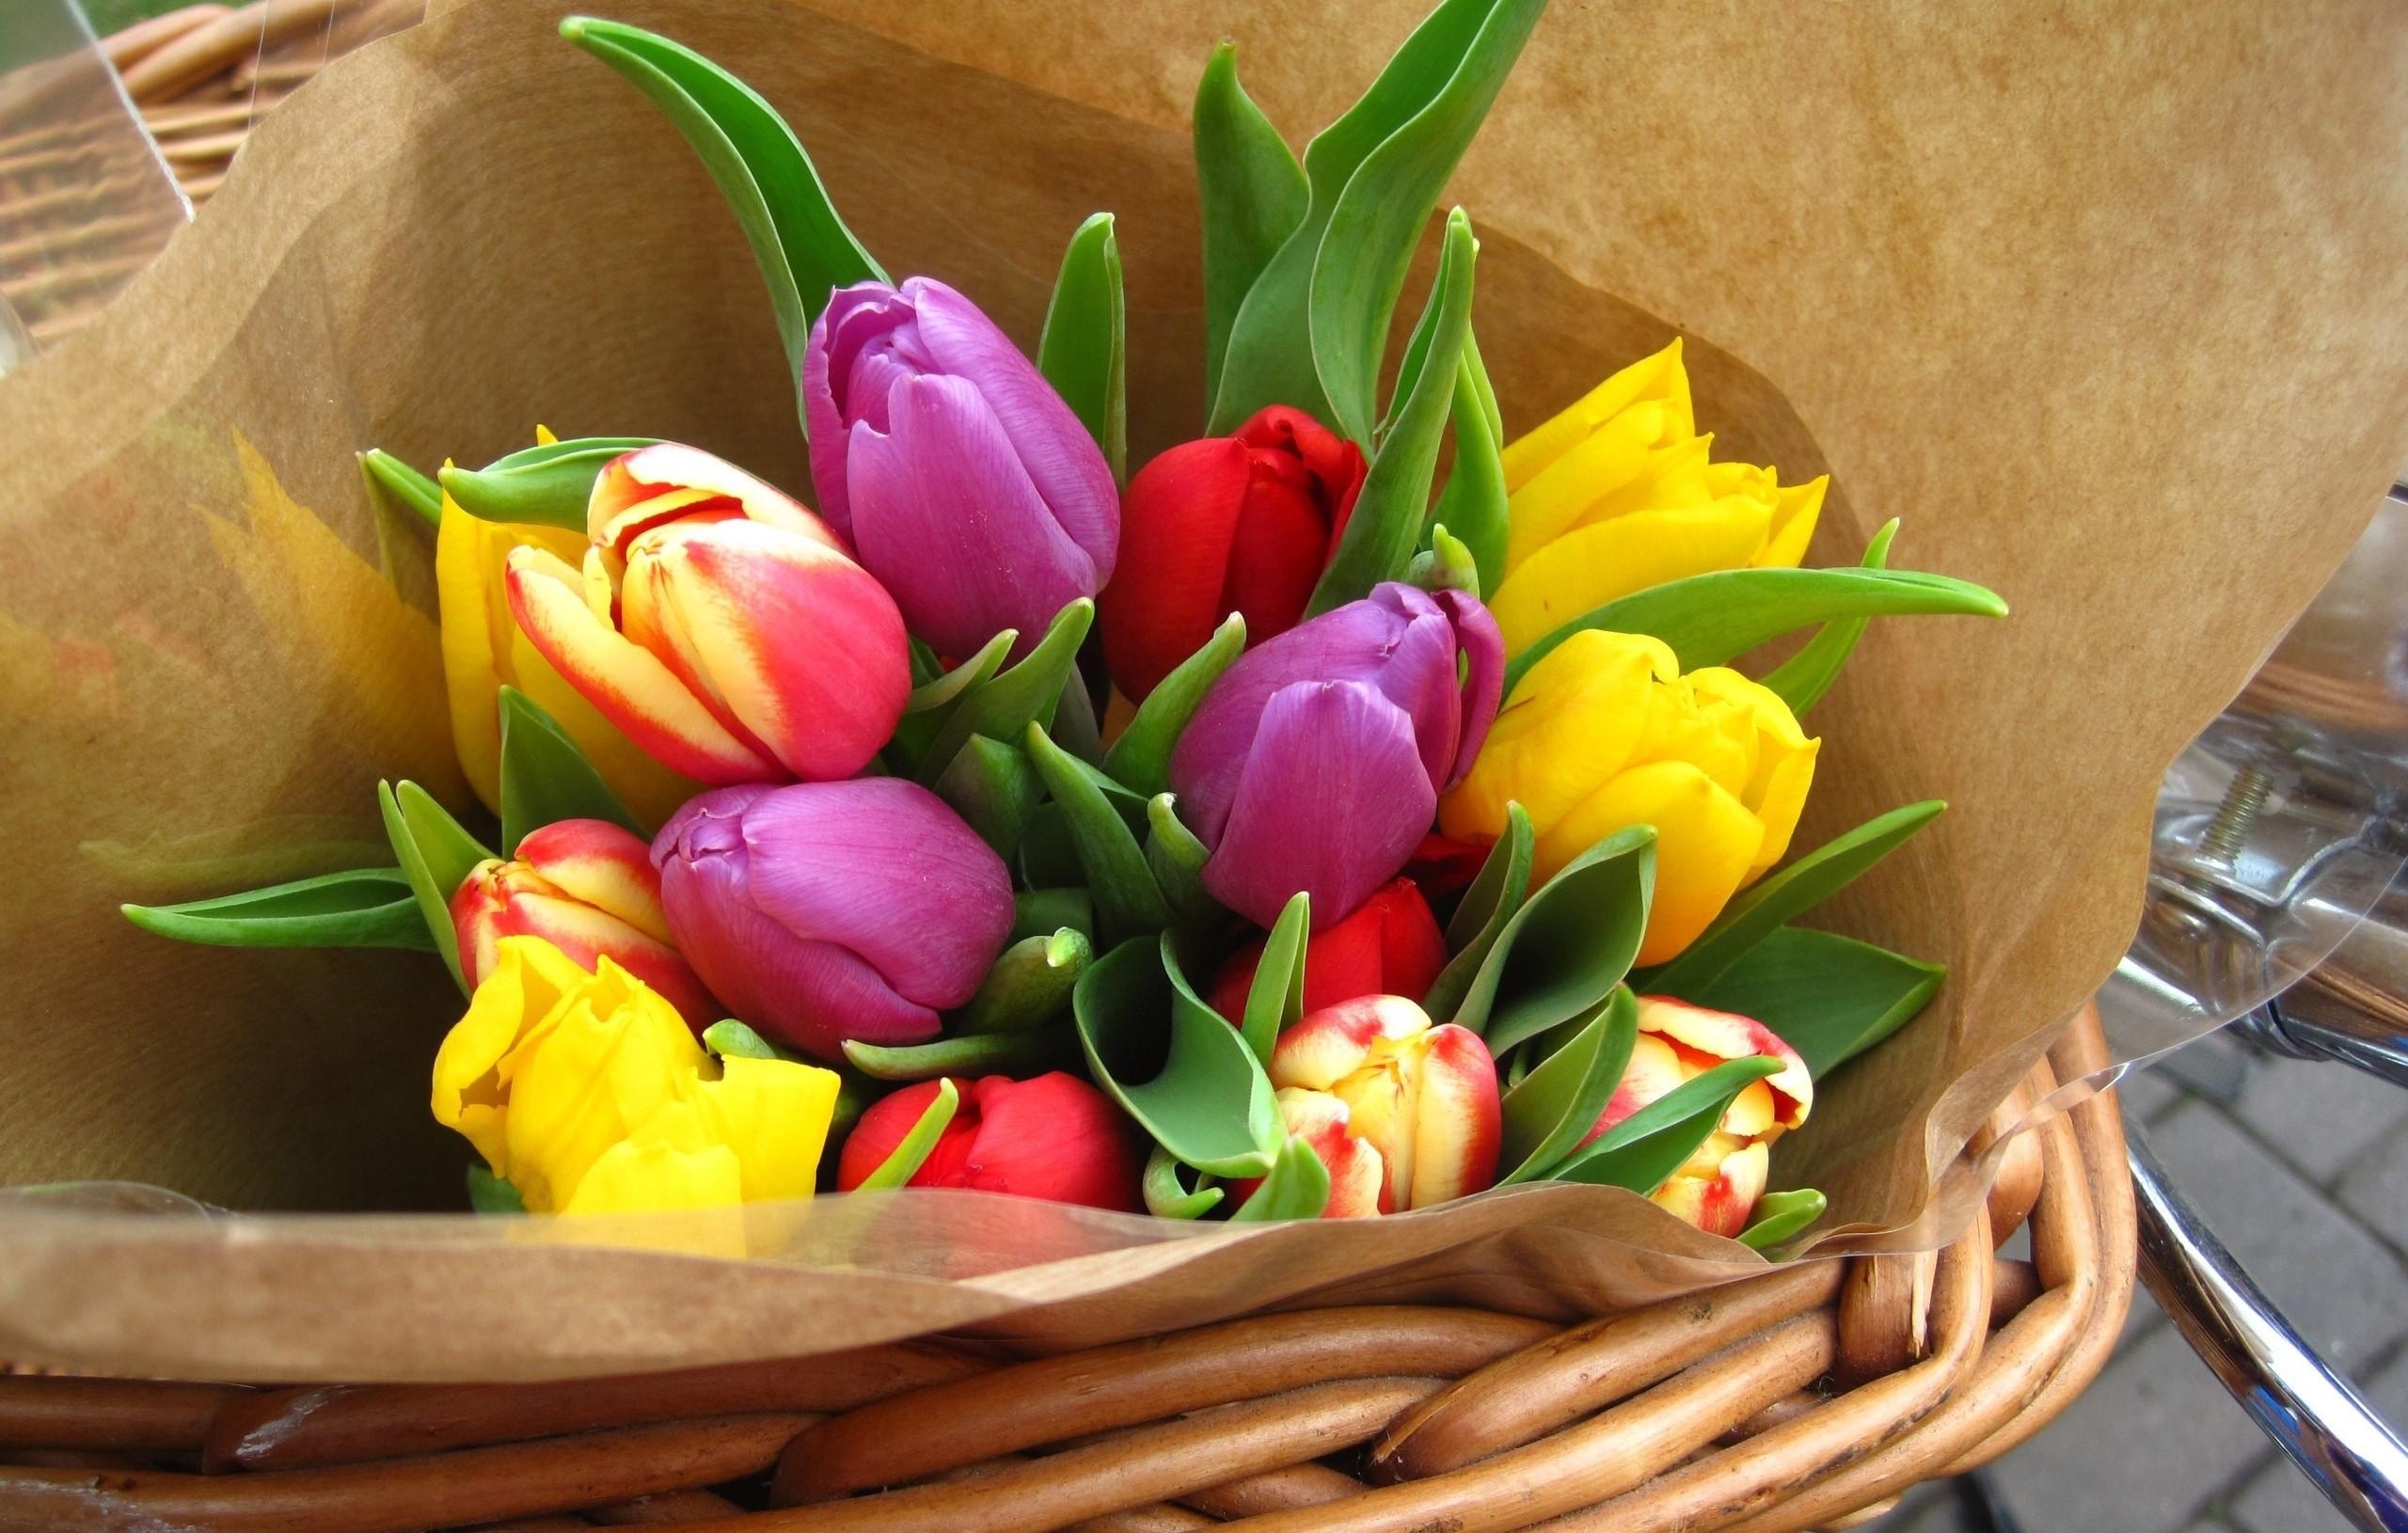 HQ Tulips Background Images